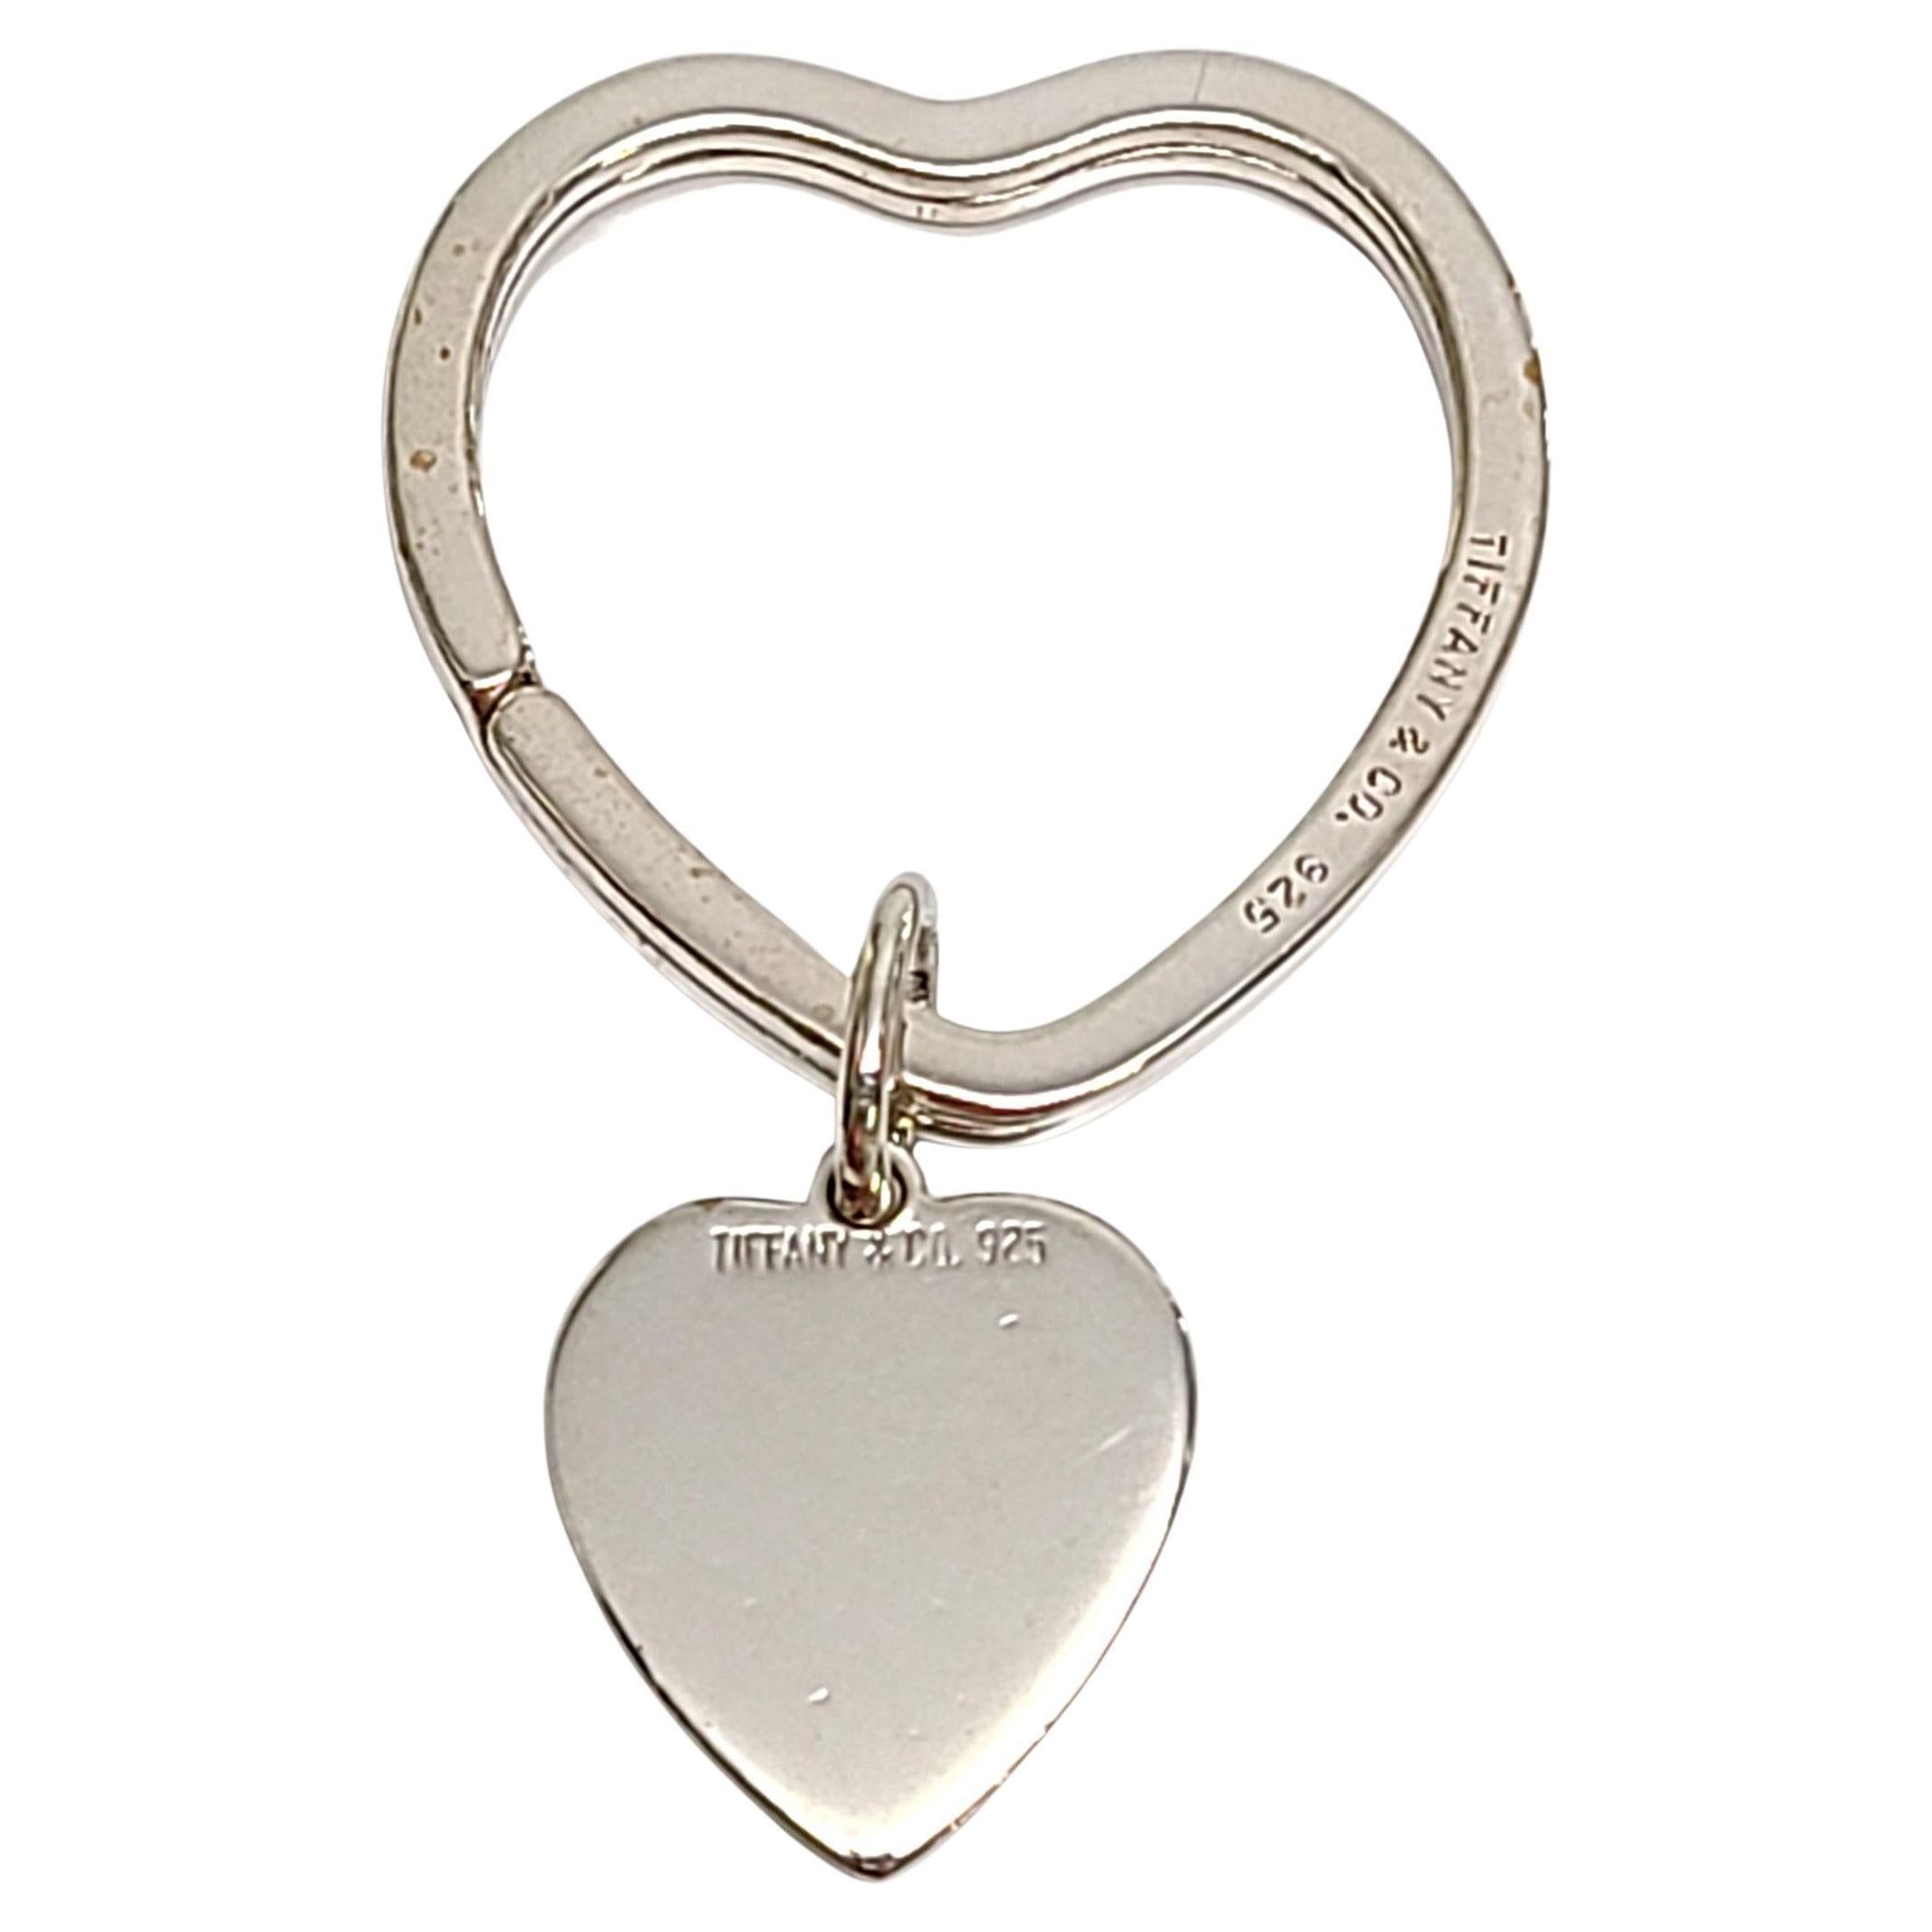 Tiffany & Co Sterling Silver Heart Key Ring with Heart Tag